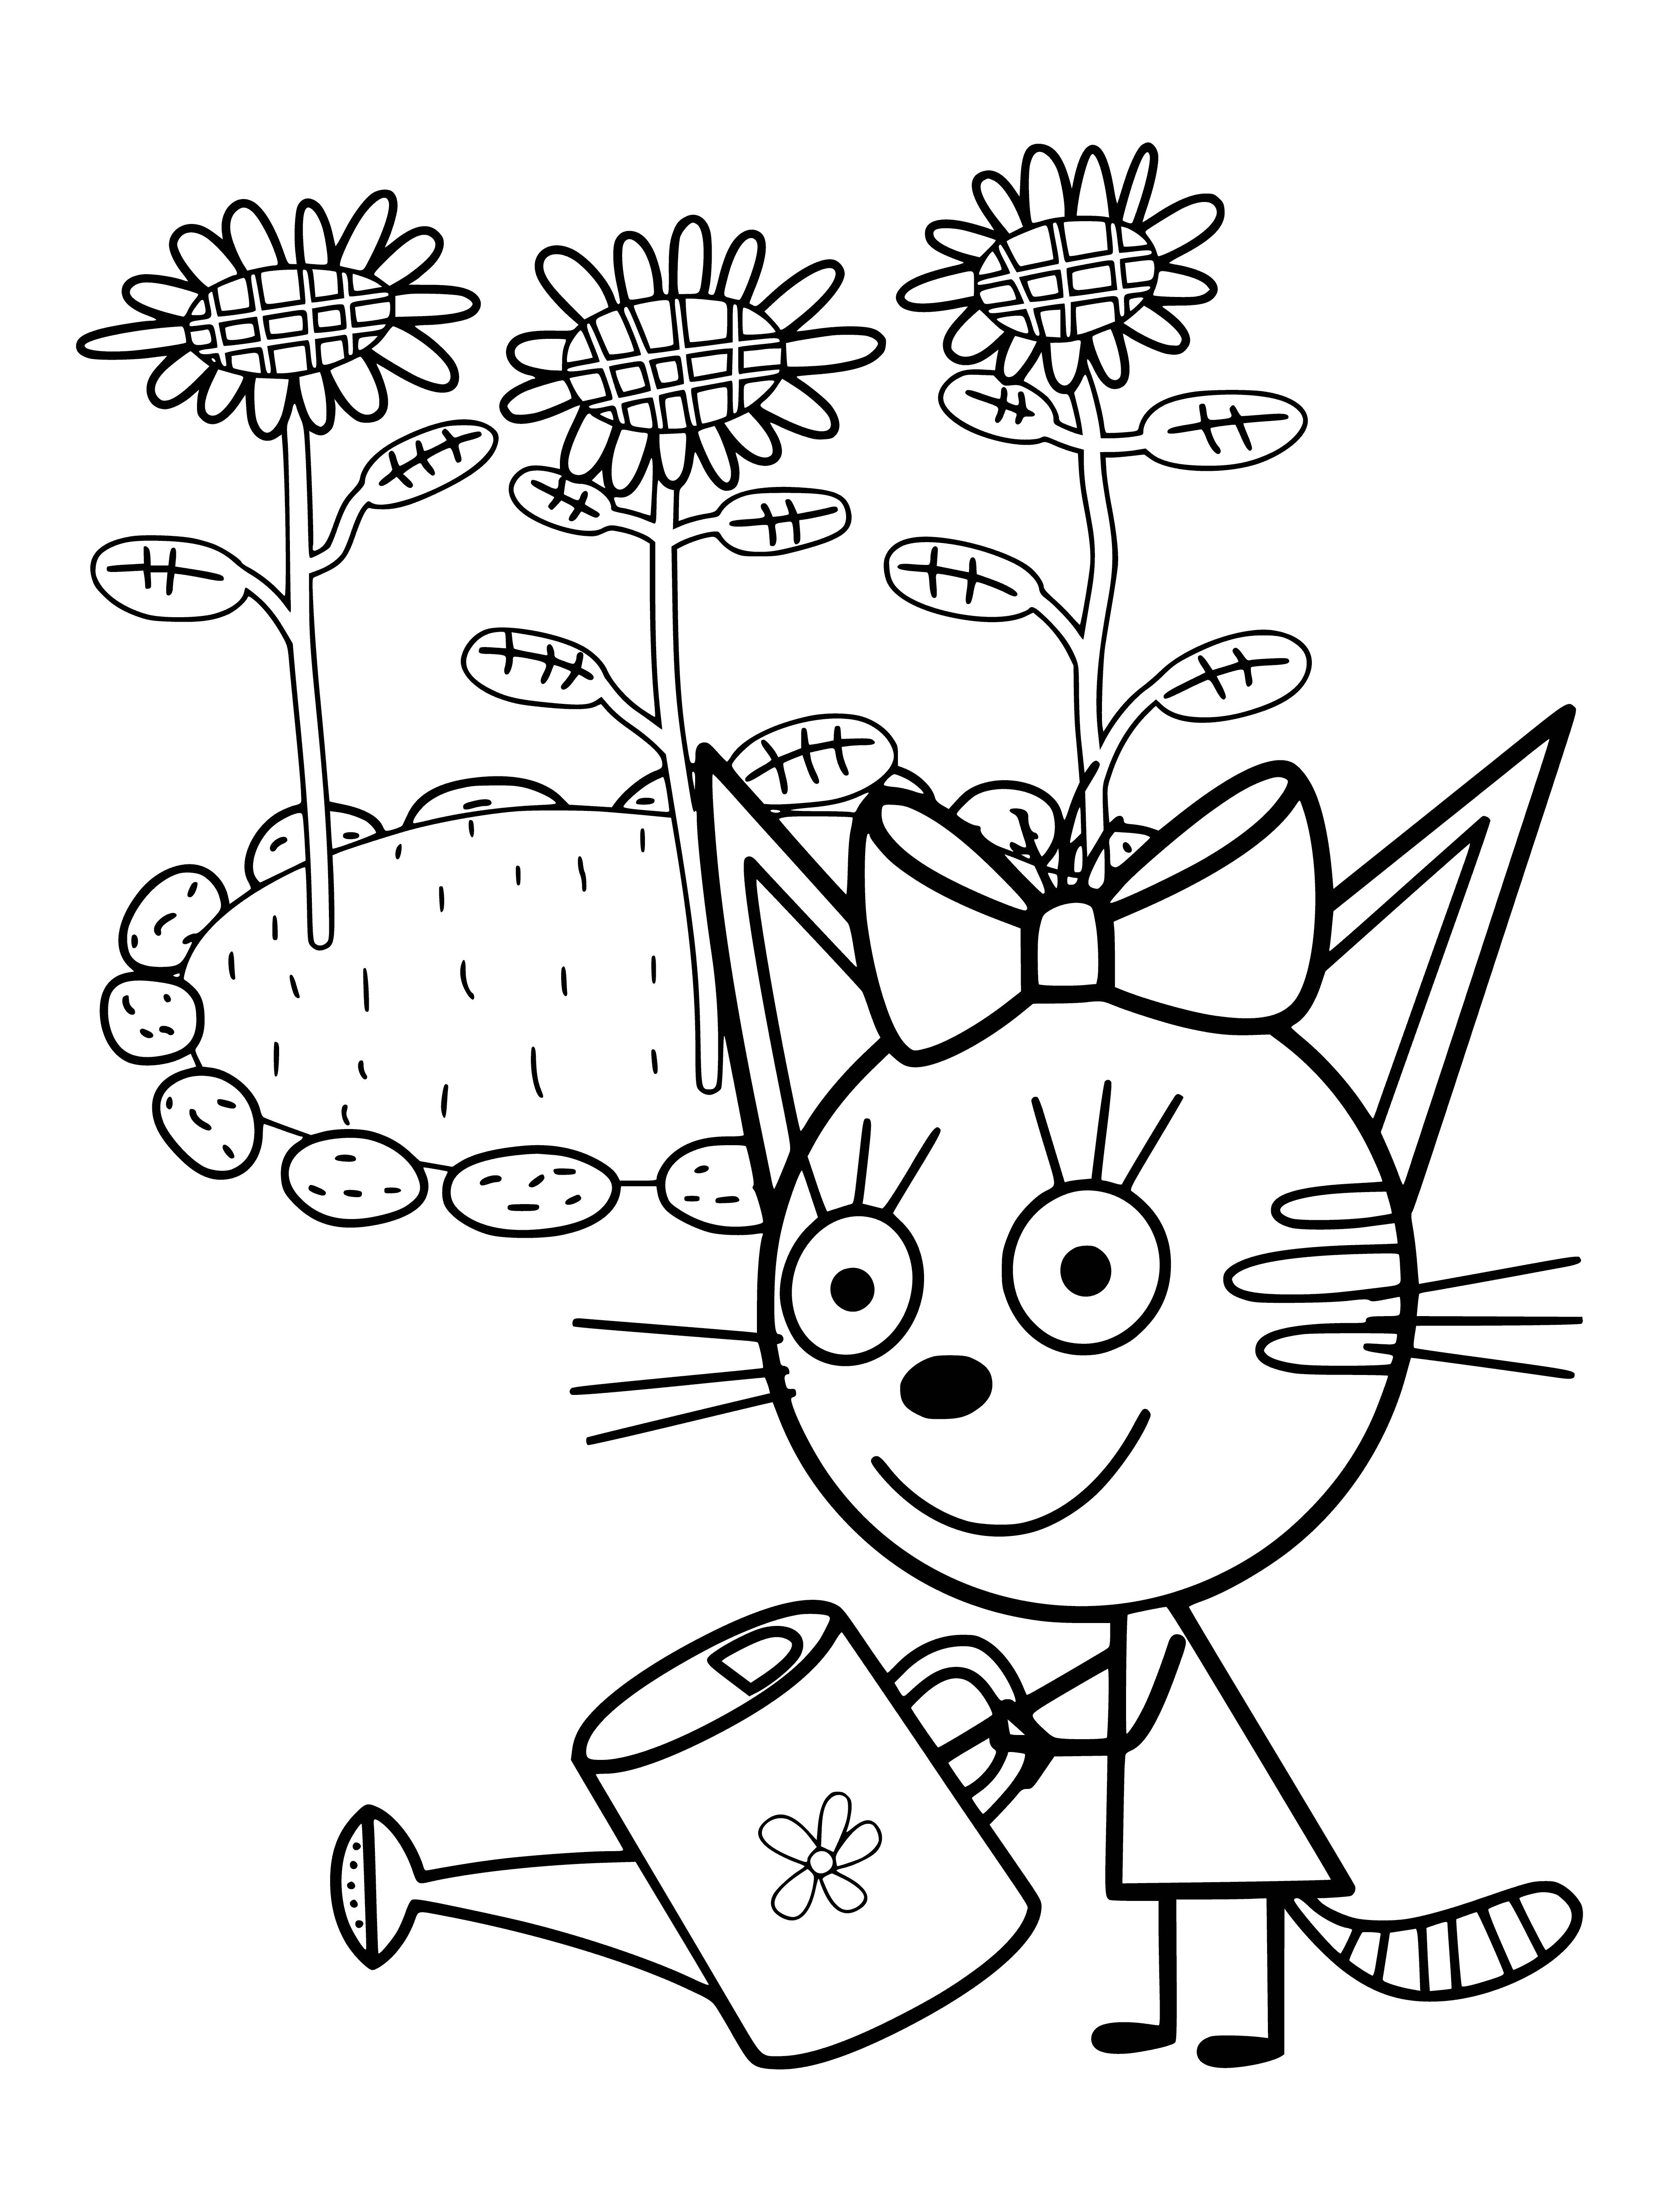 coloring page: 3 cats in coloring page - a black one sitting, one standing and one sitting. One by watering can, another by a plant.